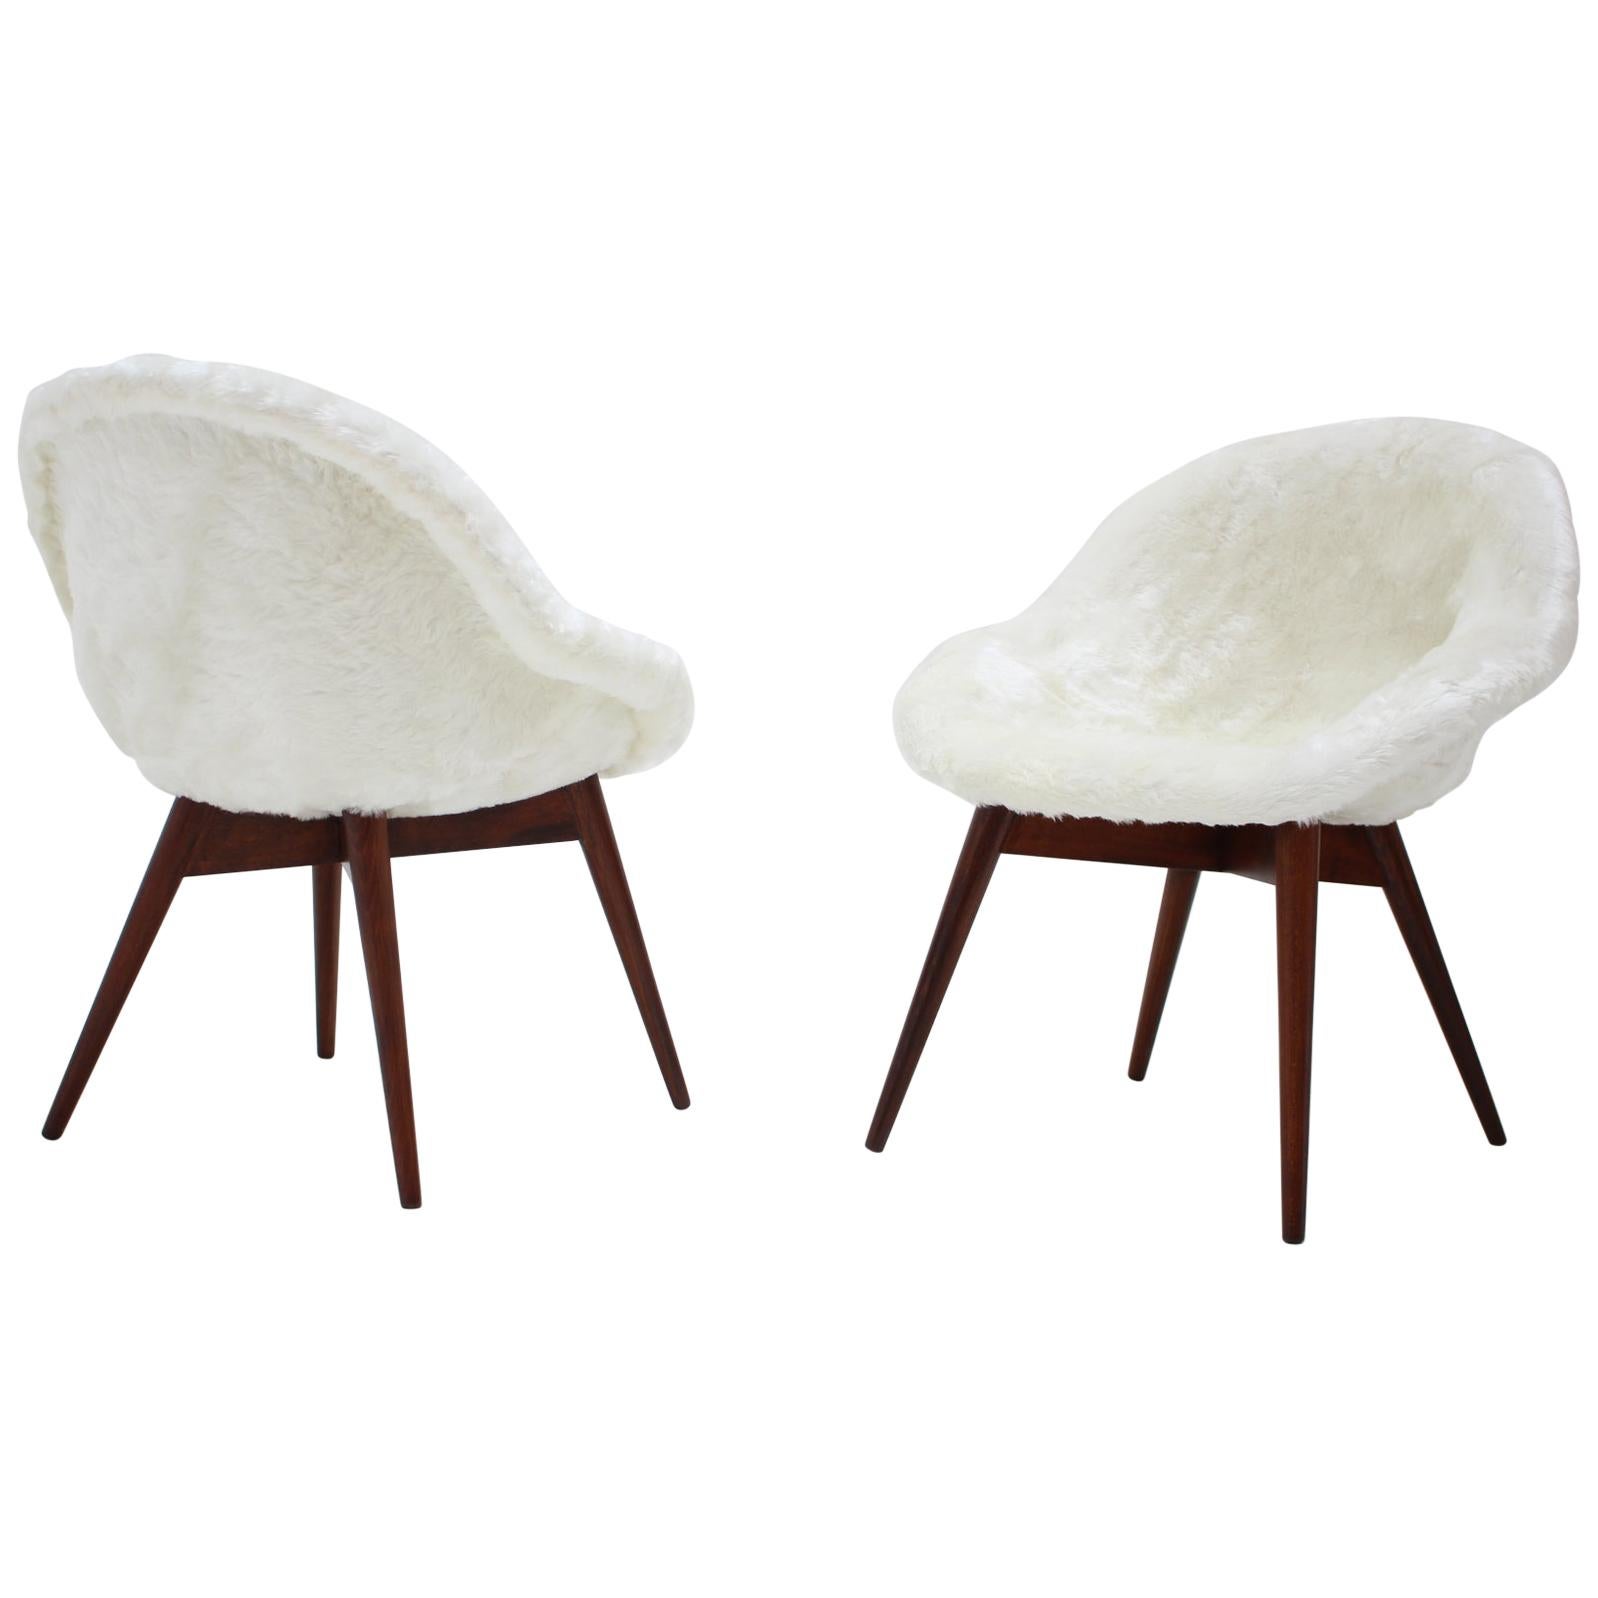 Pair of Lounge Chairs by Miroslav Navratil, 1960s